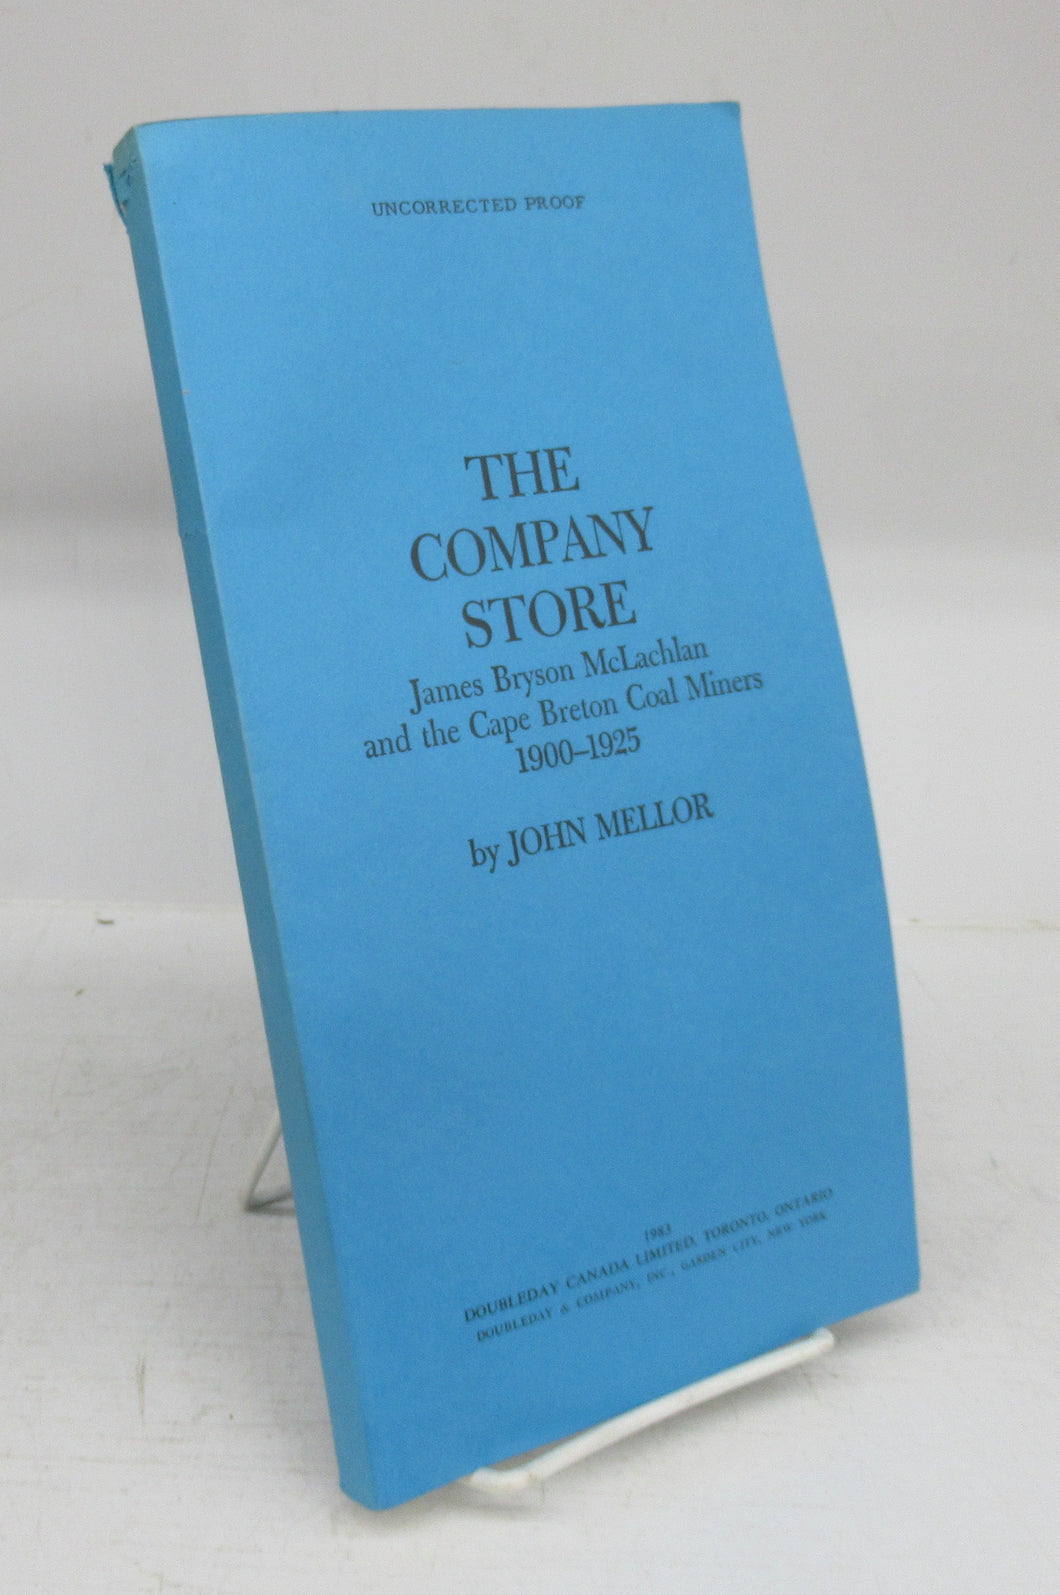 The Company Store: James Bryson McLachlan and the Cape Breton Coal Miners 1900-1925